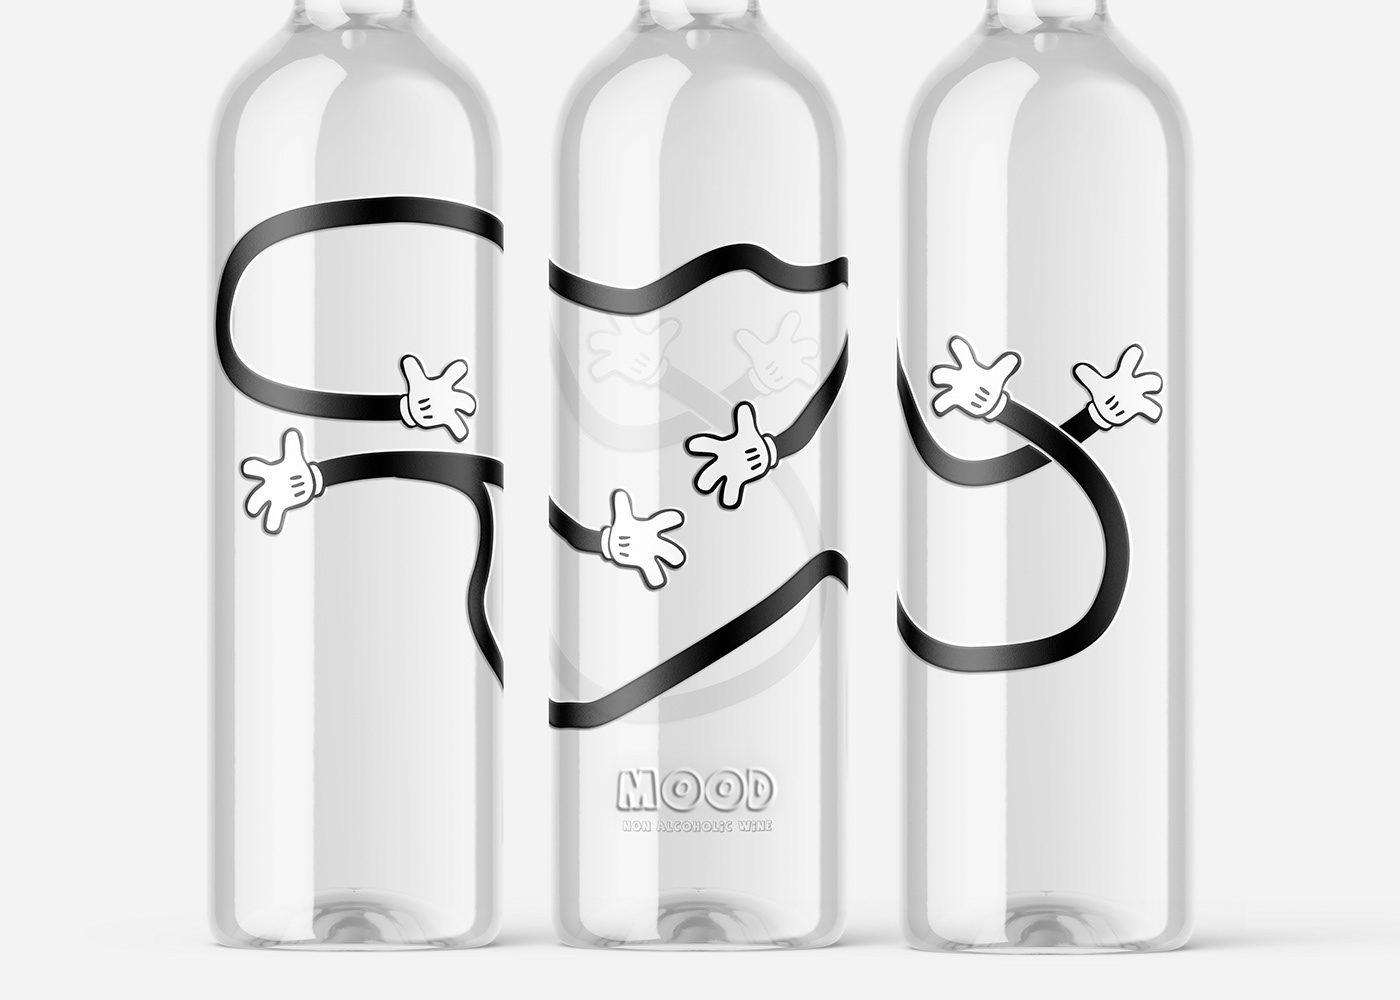 argentinianwine mood nonalcoholicwine oiexpressions oiglass Packaging Winepackaging